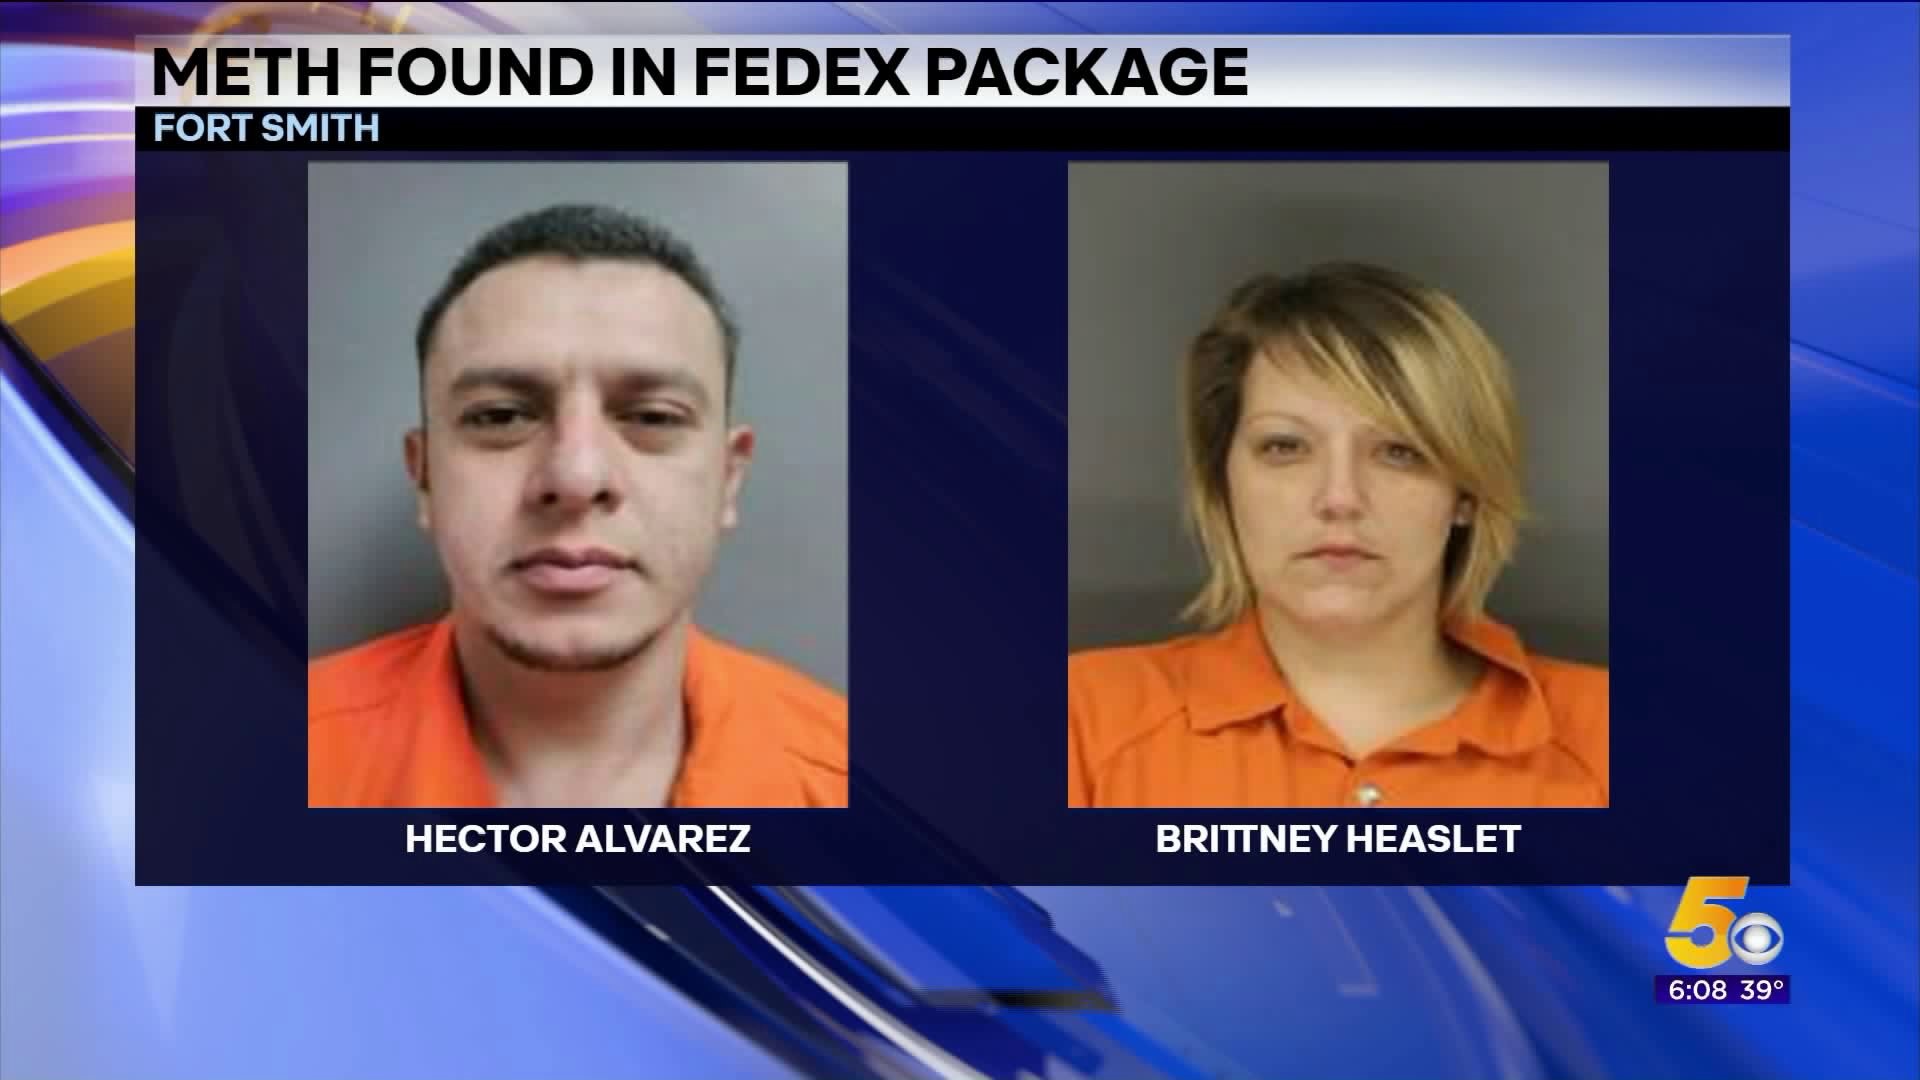 2 People Arrested After Fort Smith FedEx Workers Find Meth Inside Package